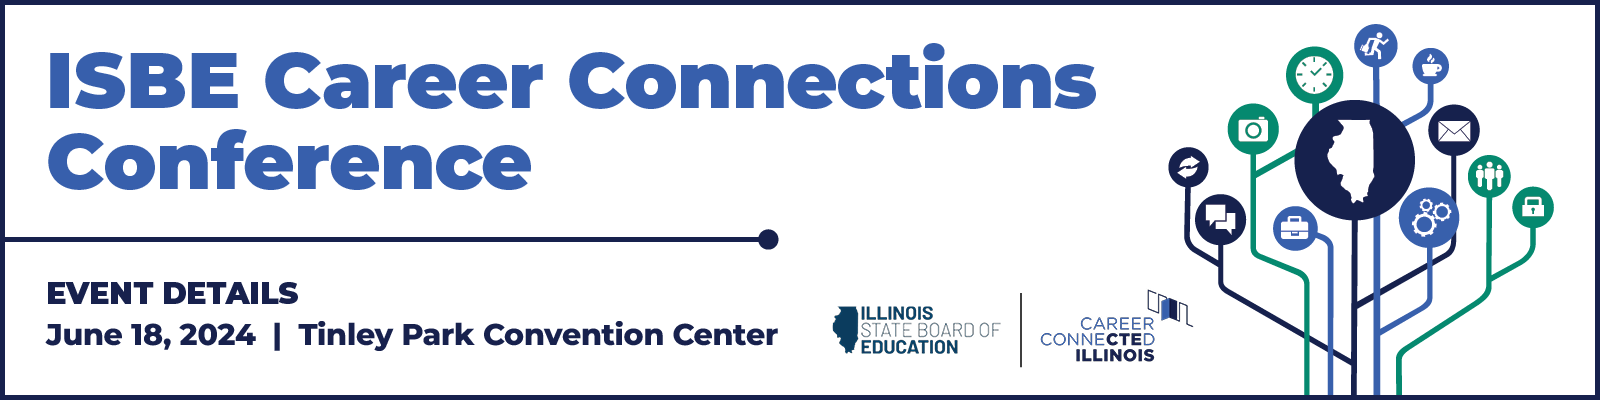 ISBE Career Connections Conference June 18, 2024 Tinley Park Convention Center